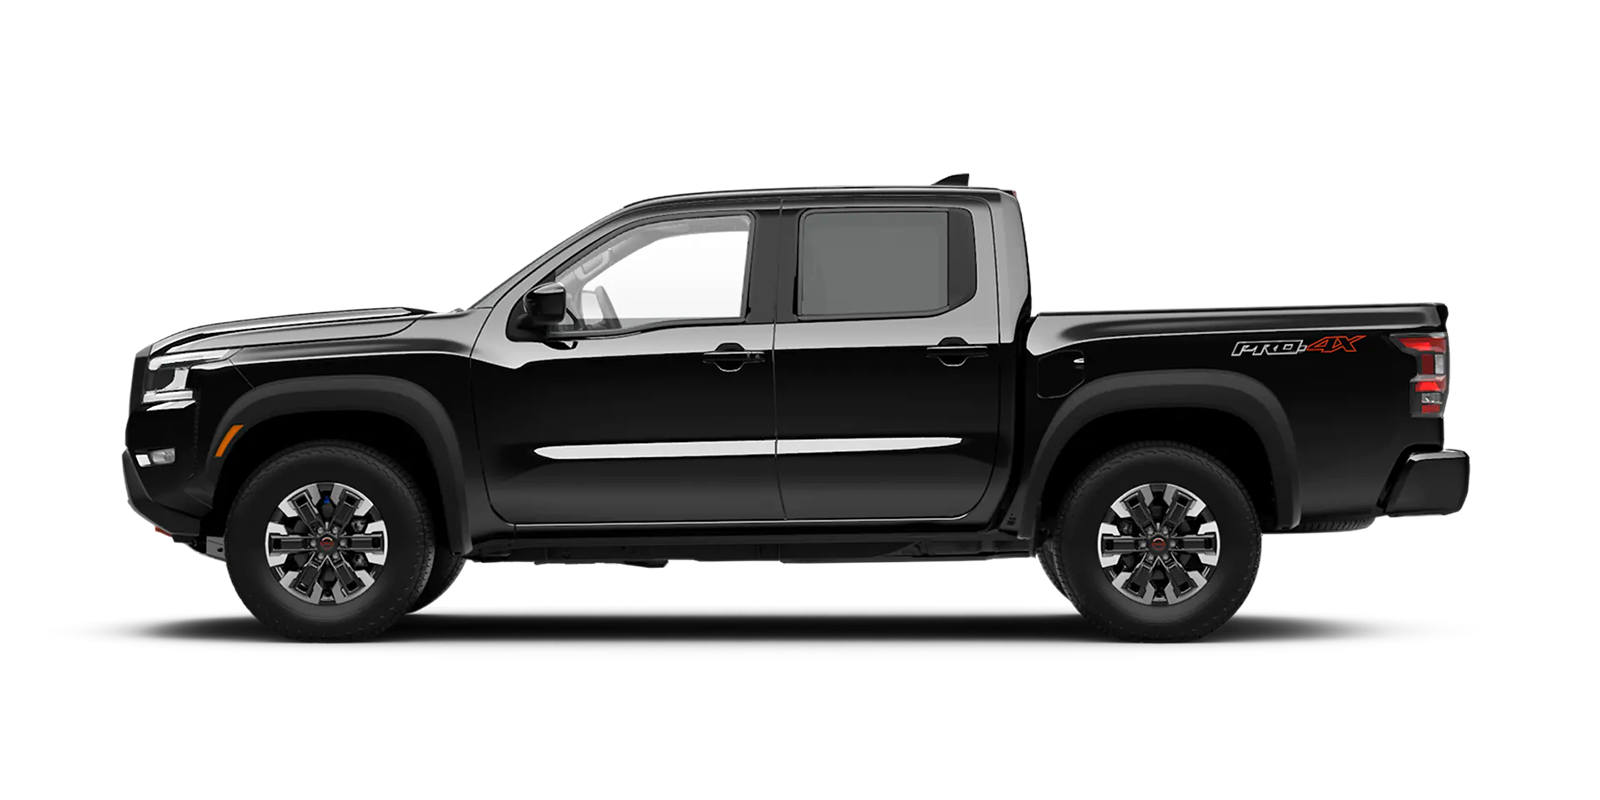 2022 Frontier Crew Cab Pro-4X 4x4 in Super Black | Nationwide Nissan in Timonium MD